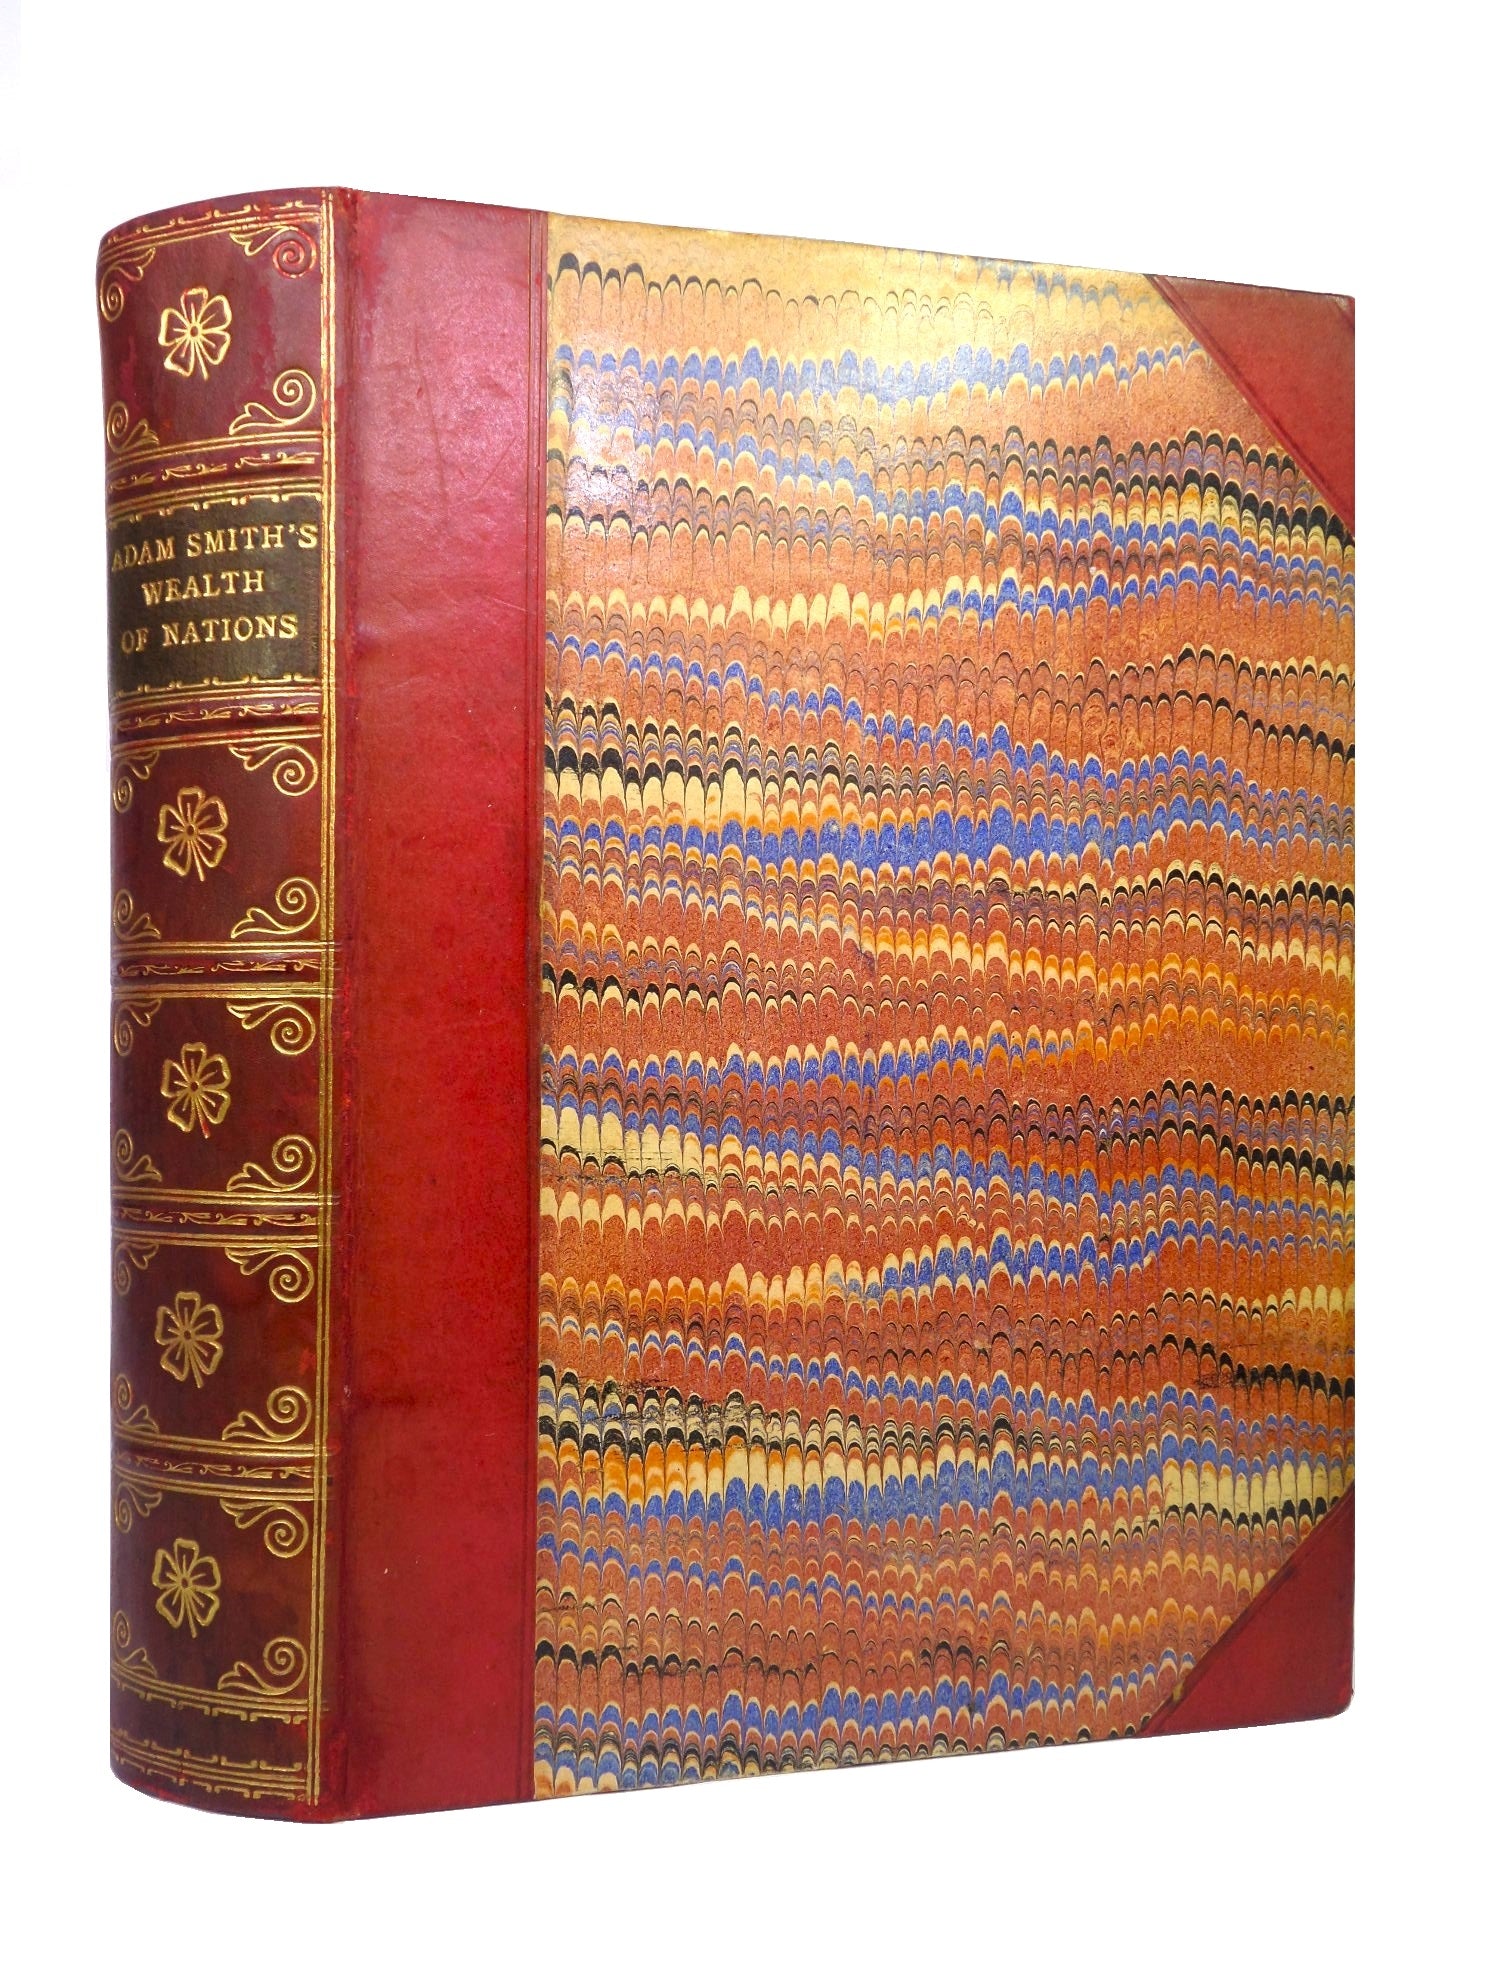 THE WEALTH OF NATIONS BY ADAM SMITH 1905 LEATHER BOUND